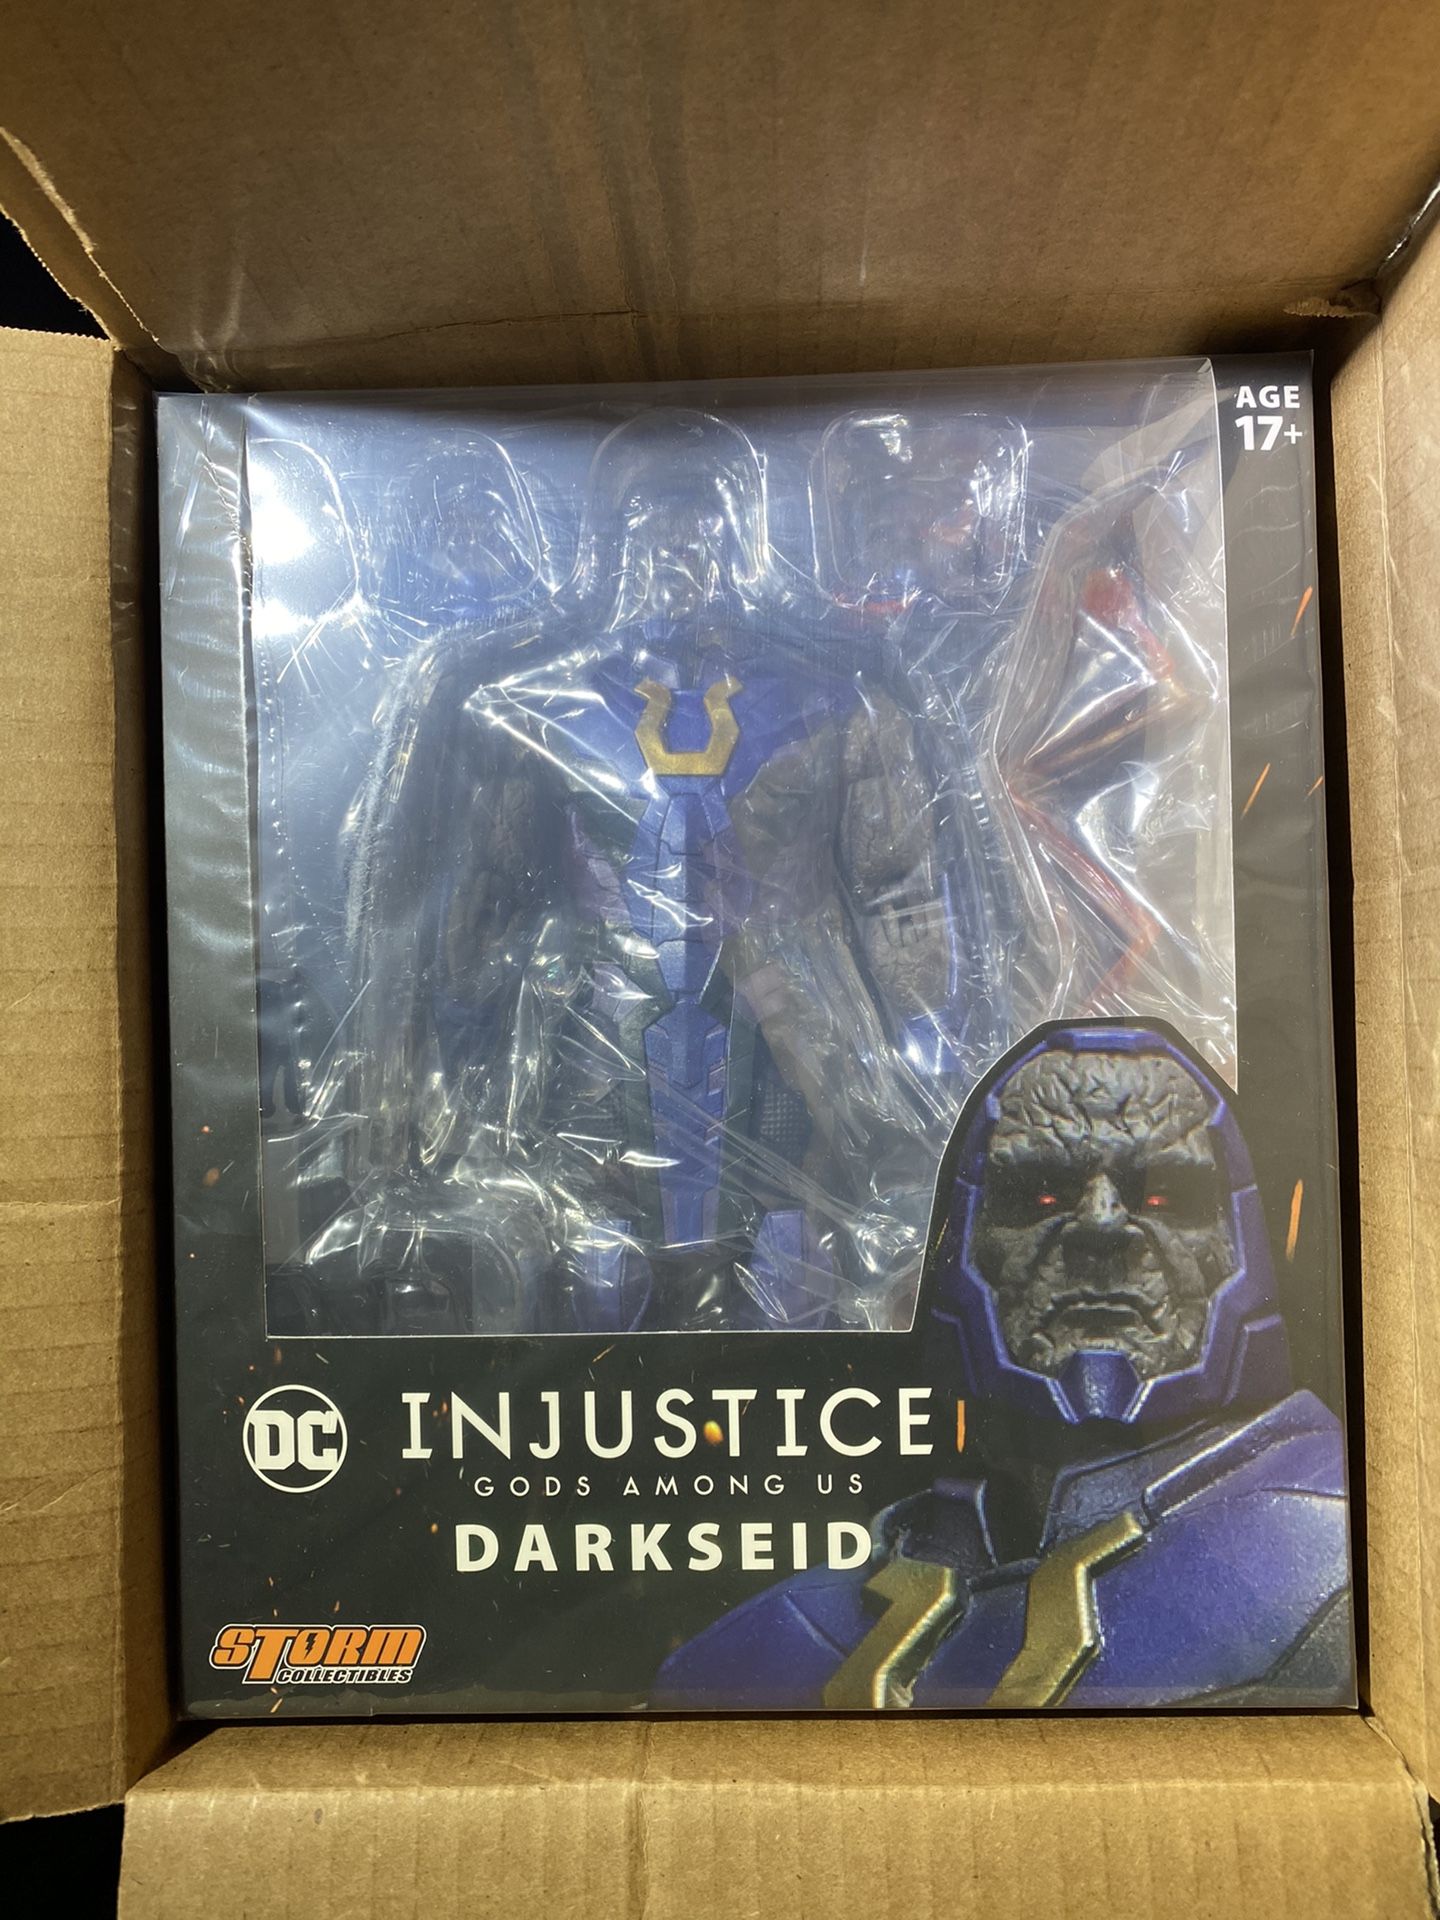 Toys! 12 Collective Darkseid and Injustice: Gods Among Us Storm Collectible Darkseid Action Figures